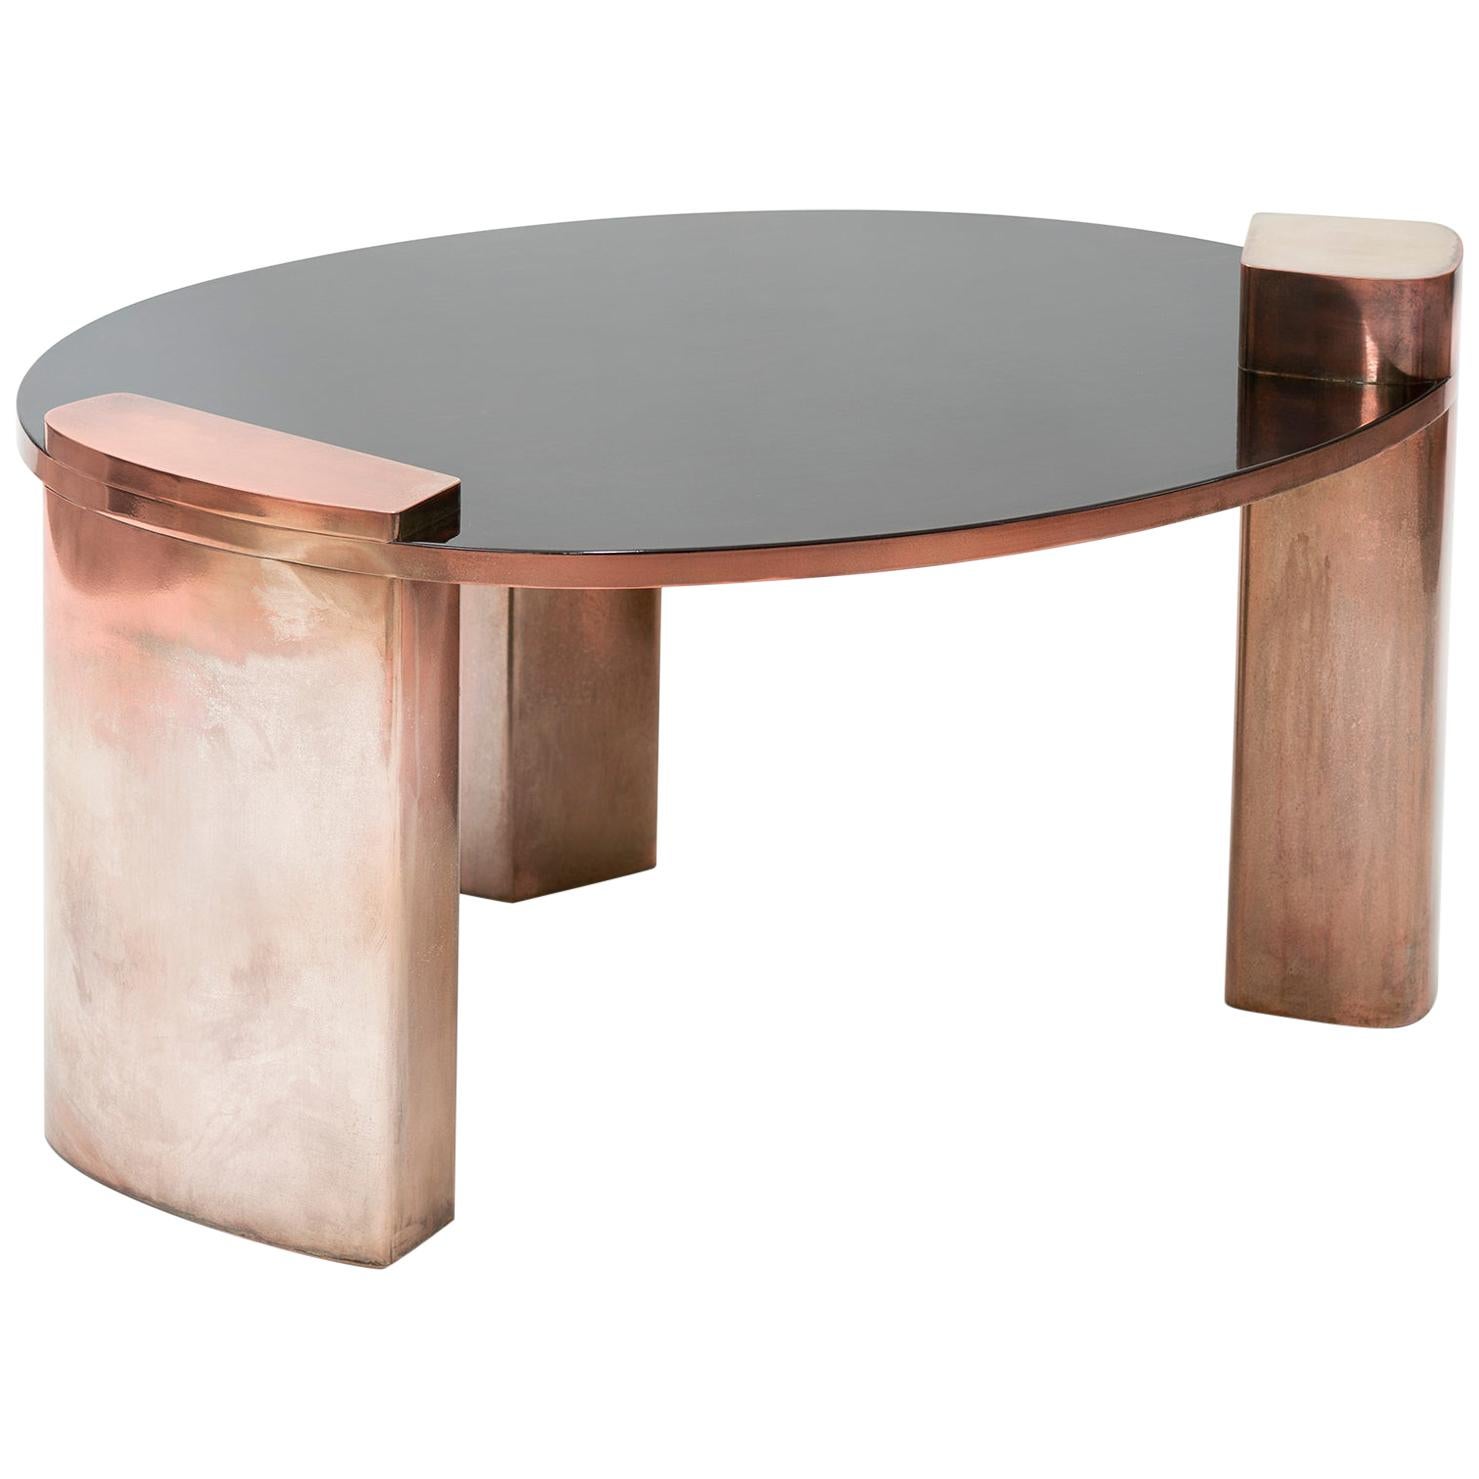 New Moon, 21st Century Lacquered Mahogany and Silvered Copper Luxury Low Table For Sale